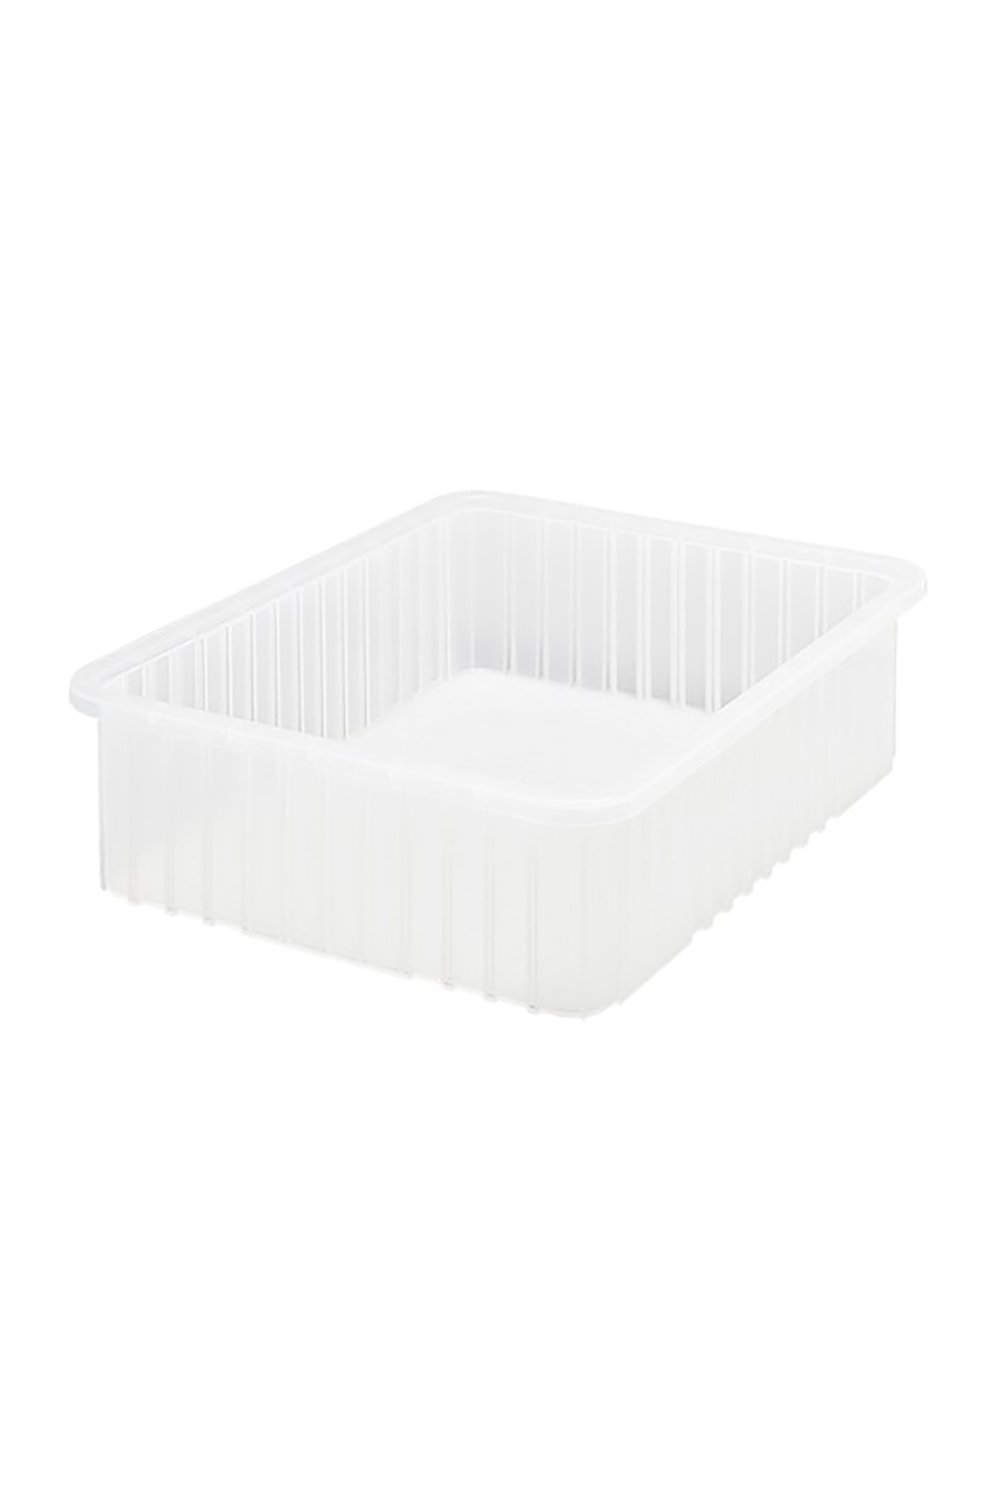 Clear View Dividable Grid Container Bins & Containers Acart 22-1/2"L x 17-1/2"W x 6"H Clear 